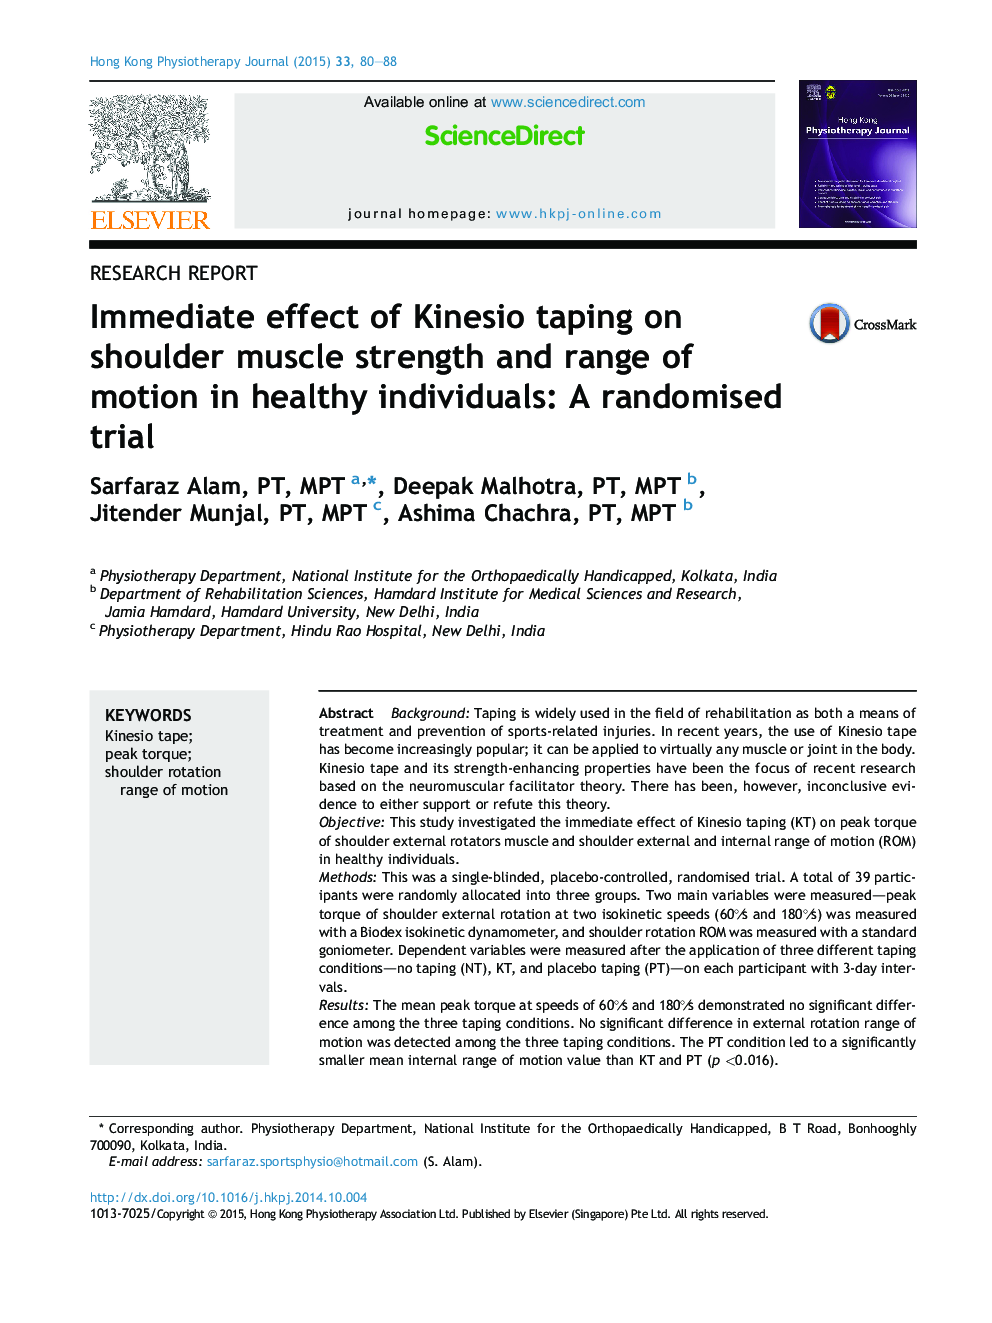 Research reportImmediate effect of Kinesio taping on shoulder muscle strength and range of motion in healthy individuals: A randomised trial